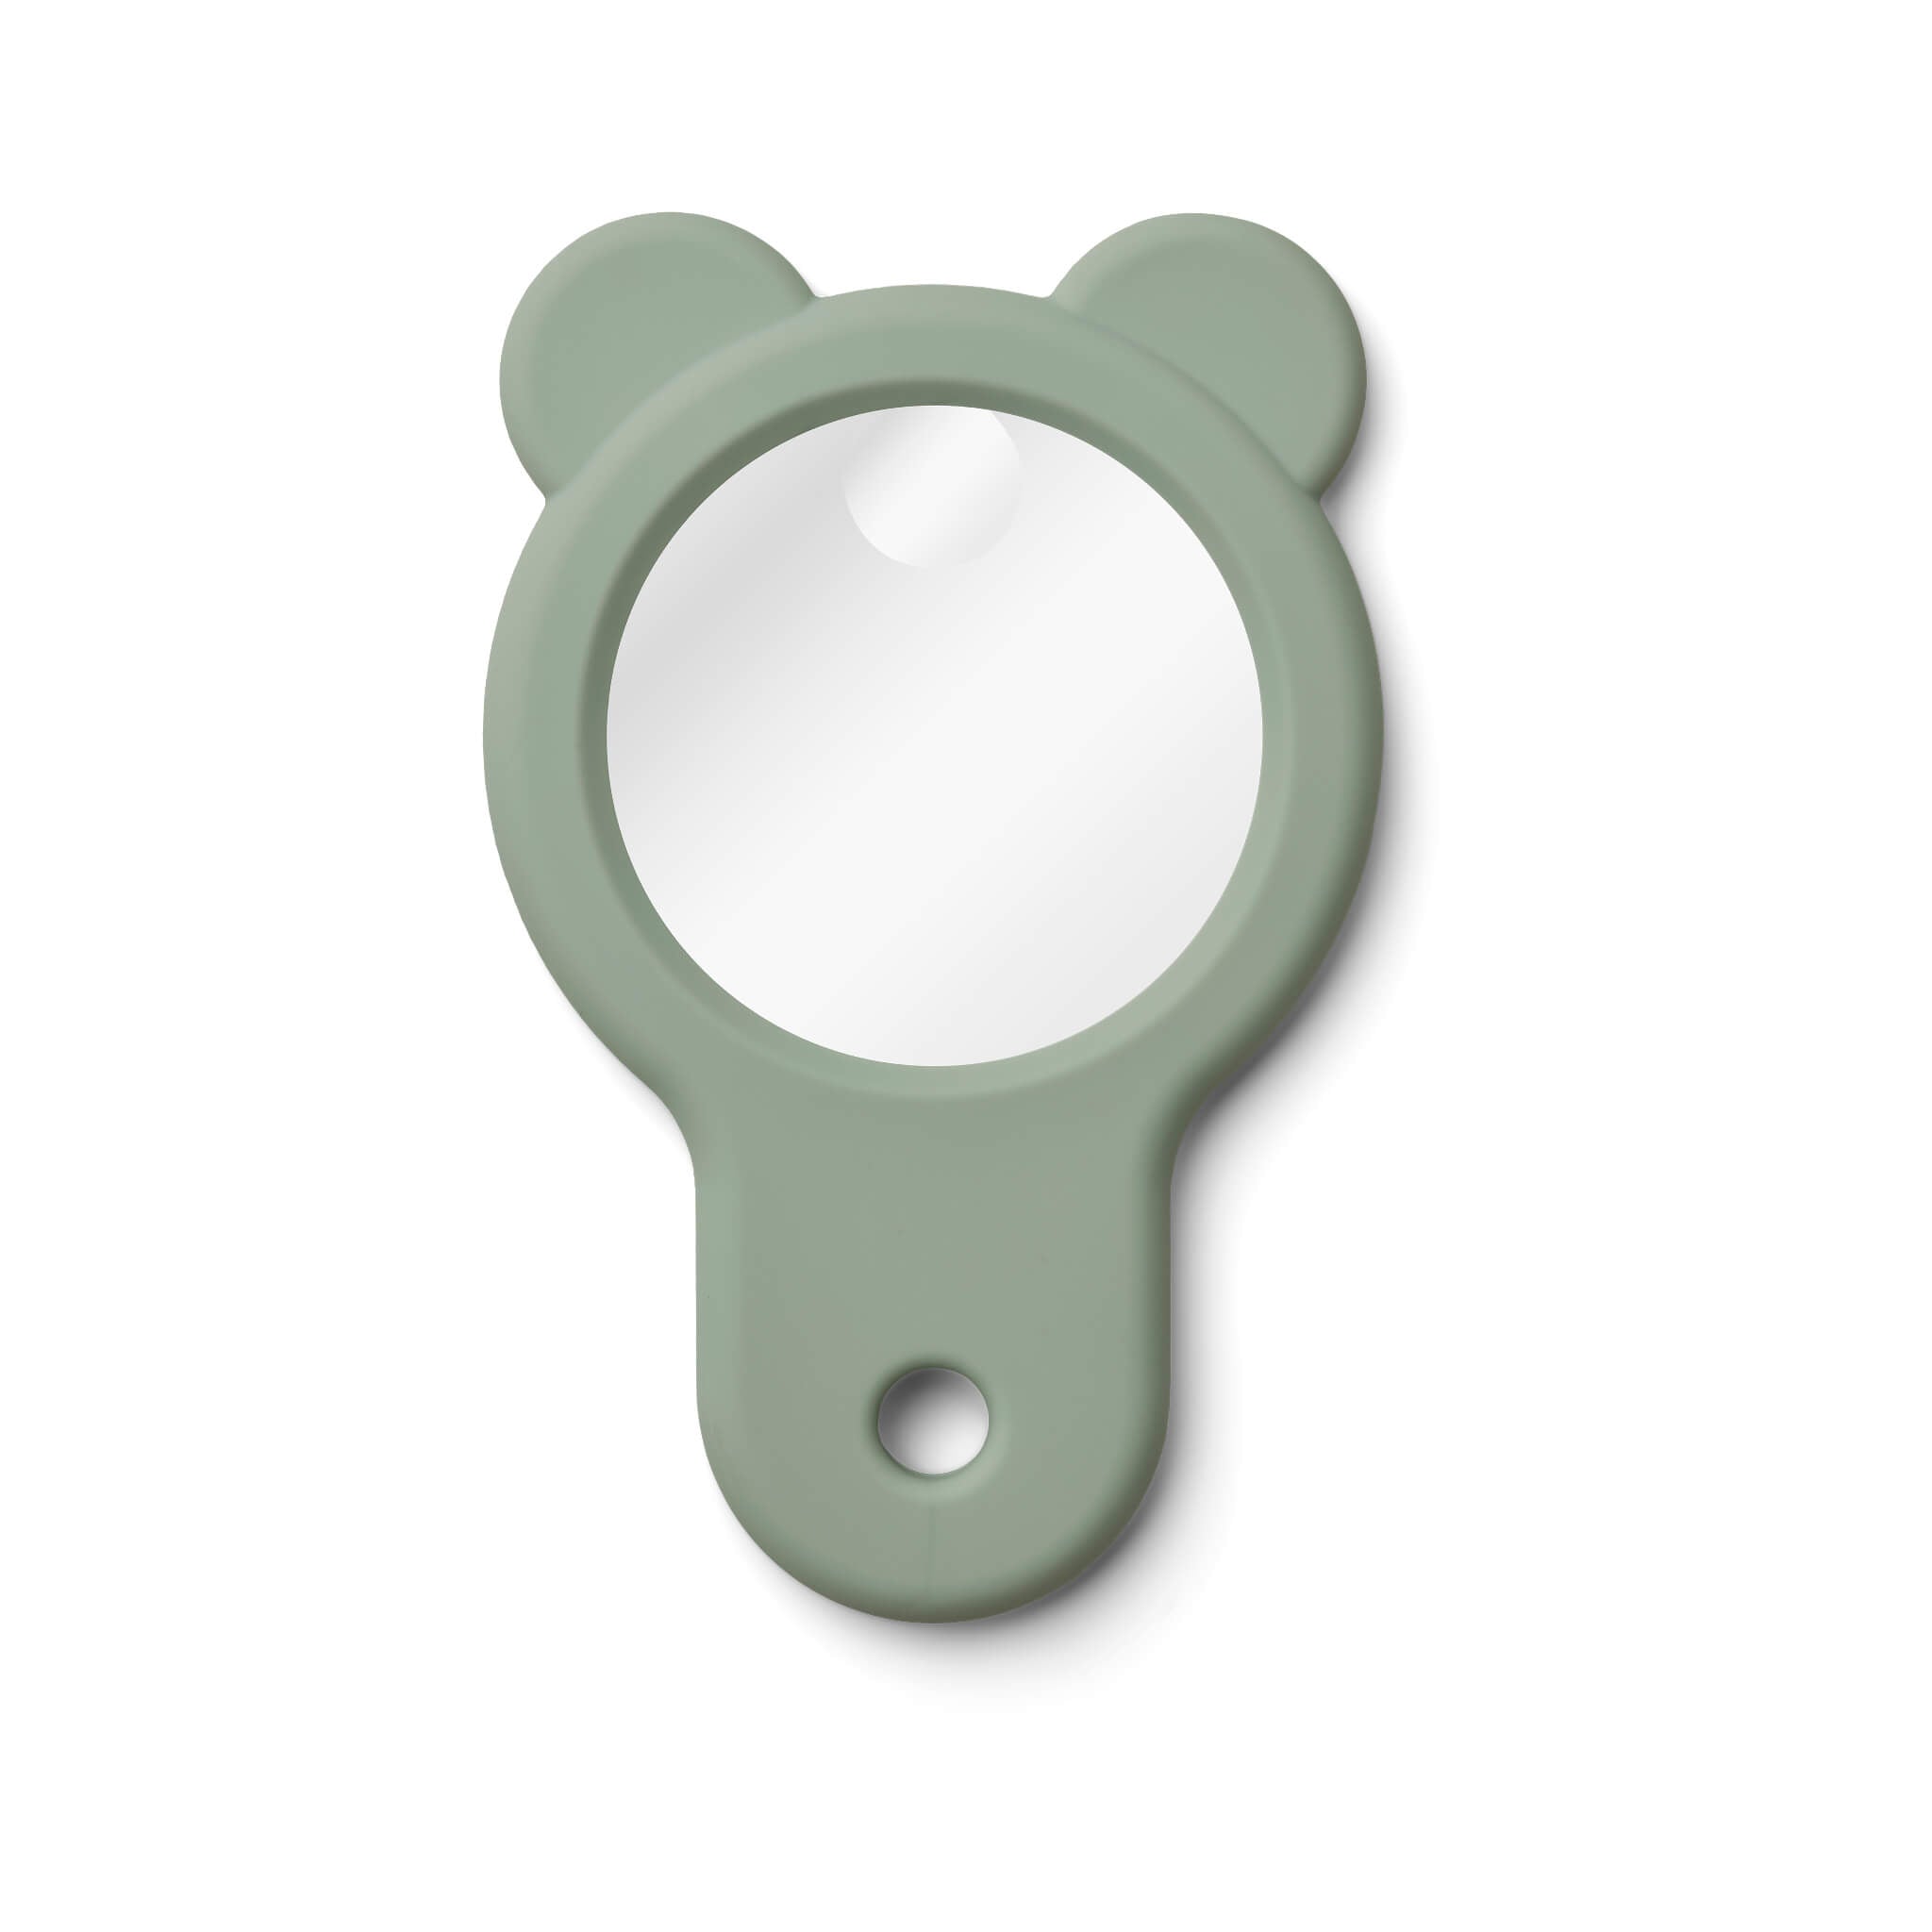 Roger Magnifying Glass - Faune Green